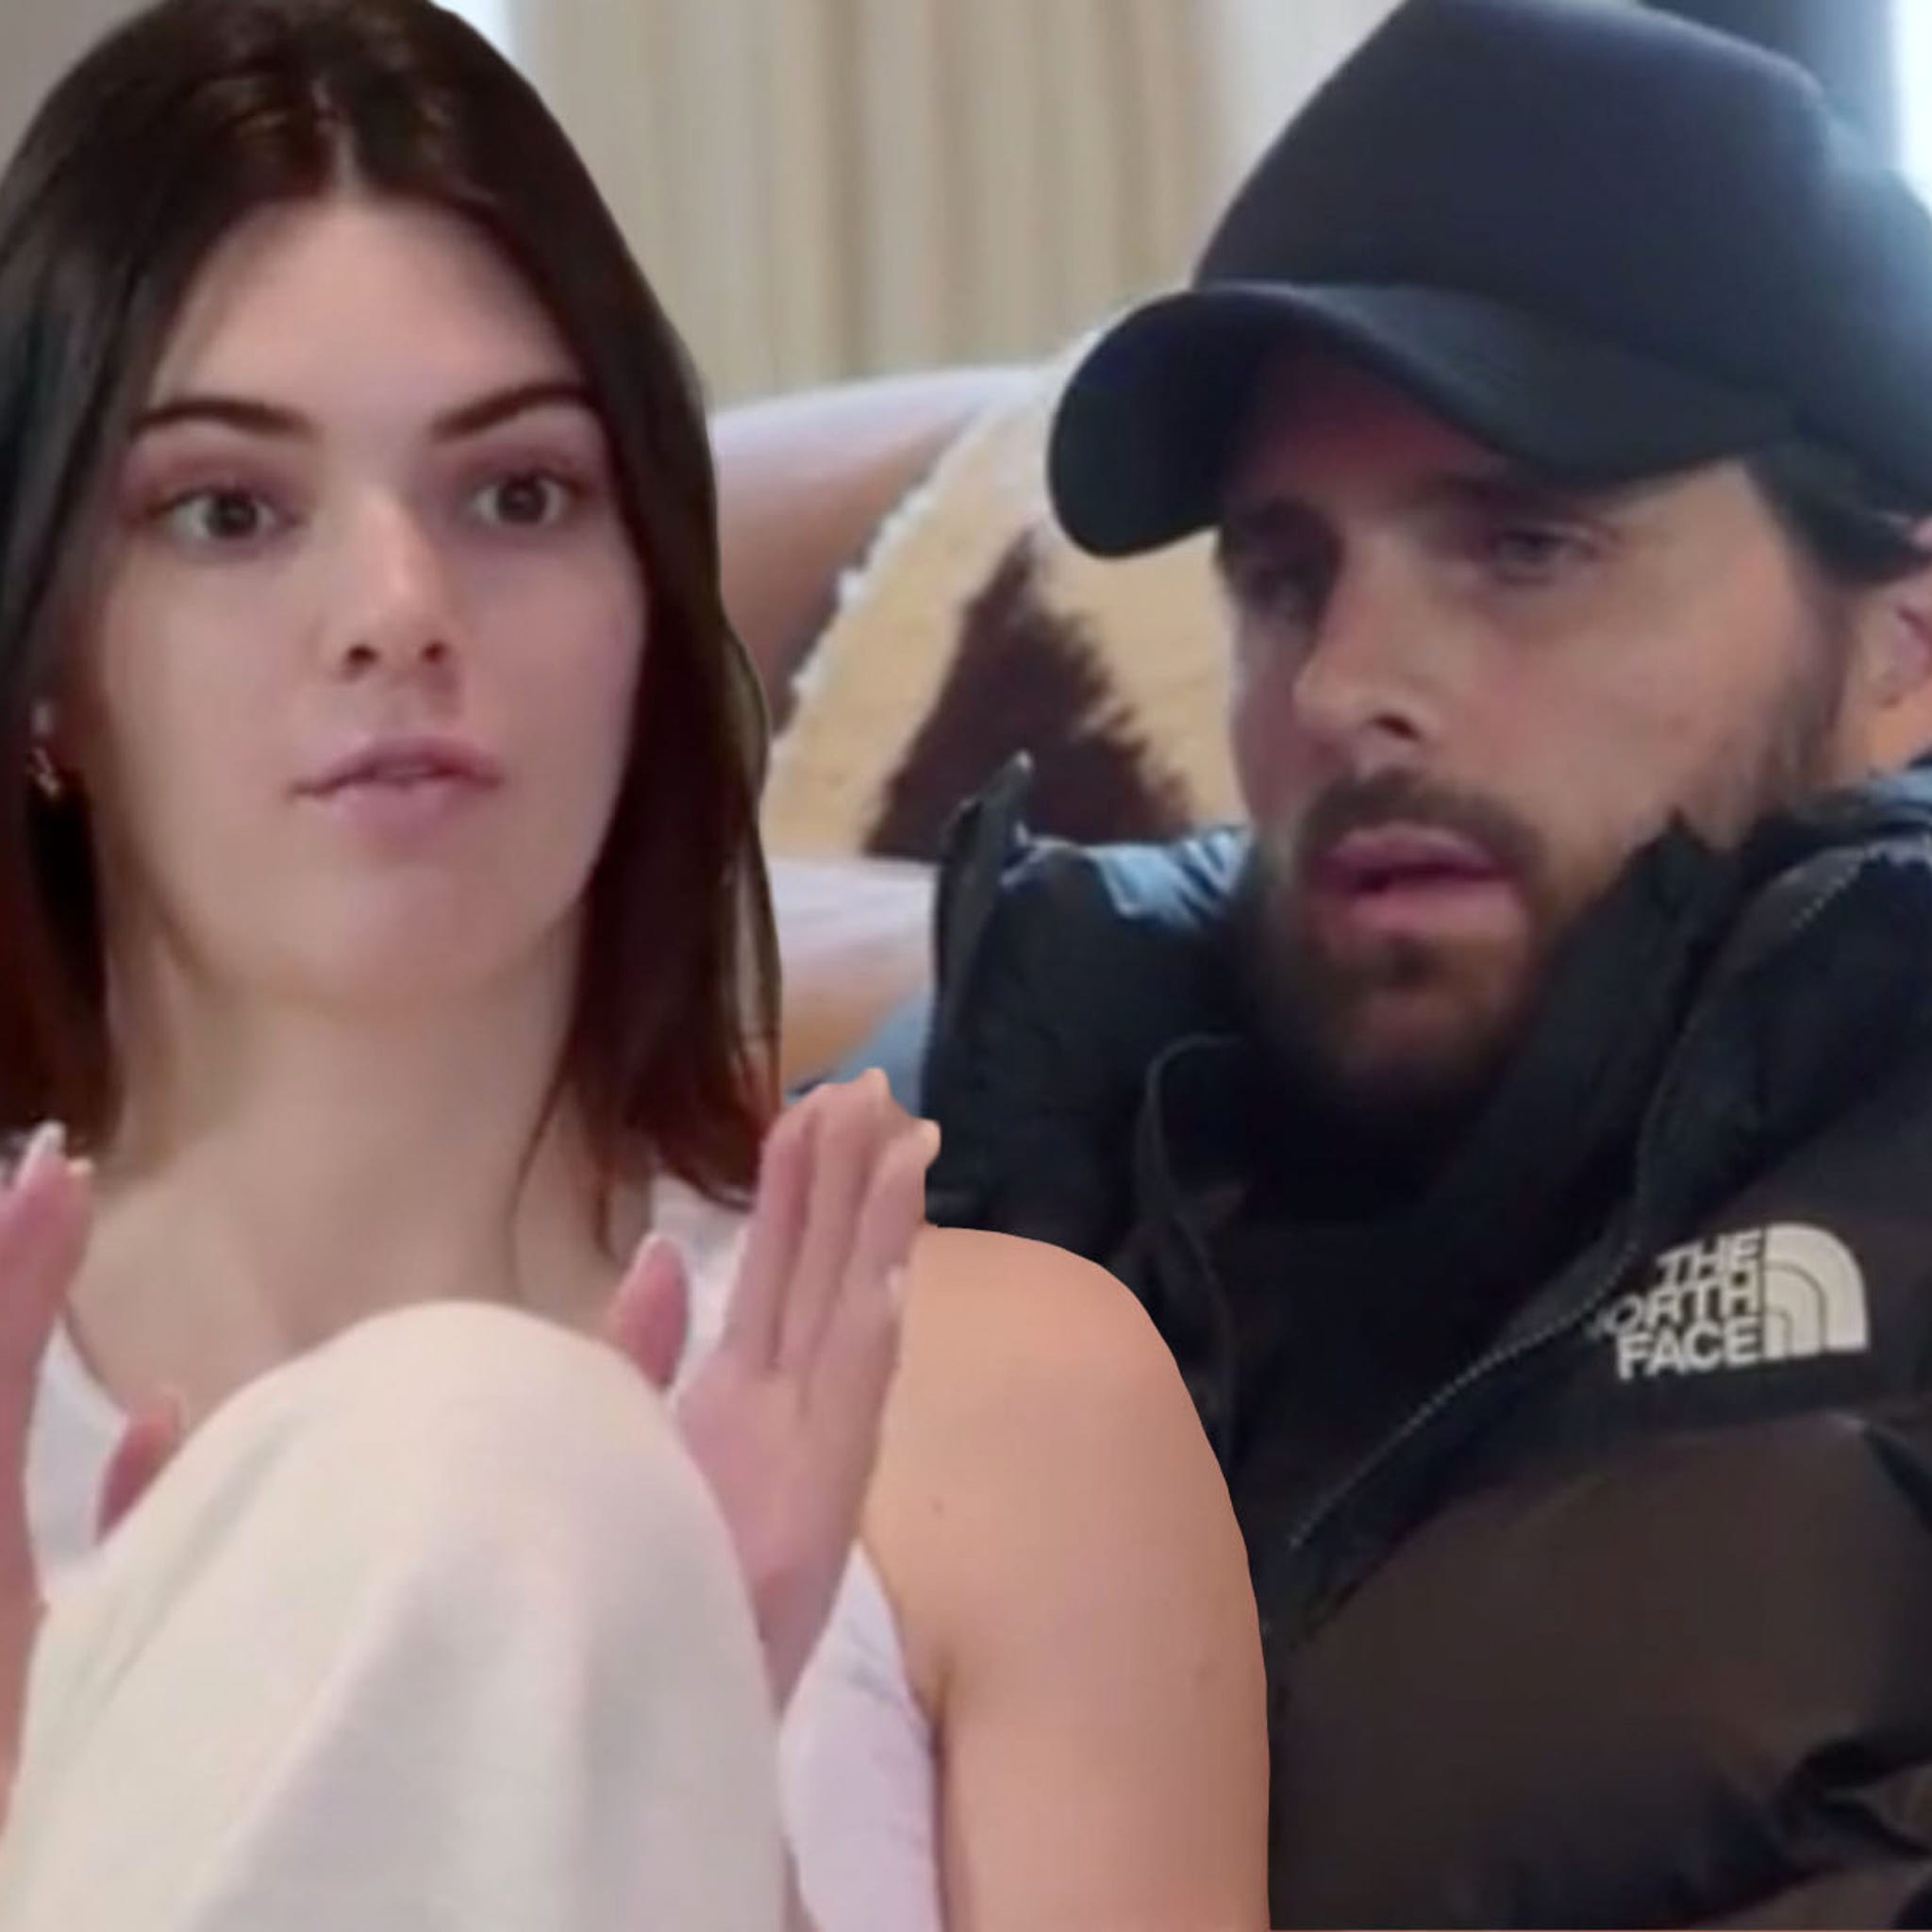 Kendall Jenner's 'complicated' relationship with Chris Brown as